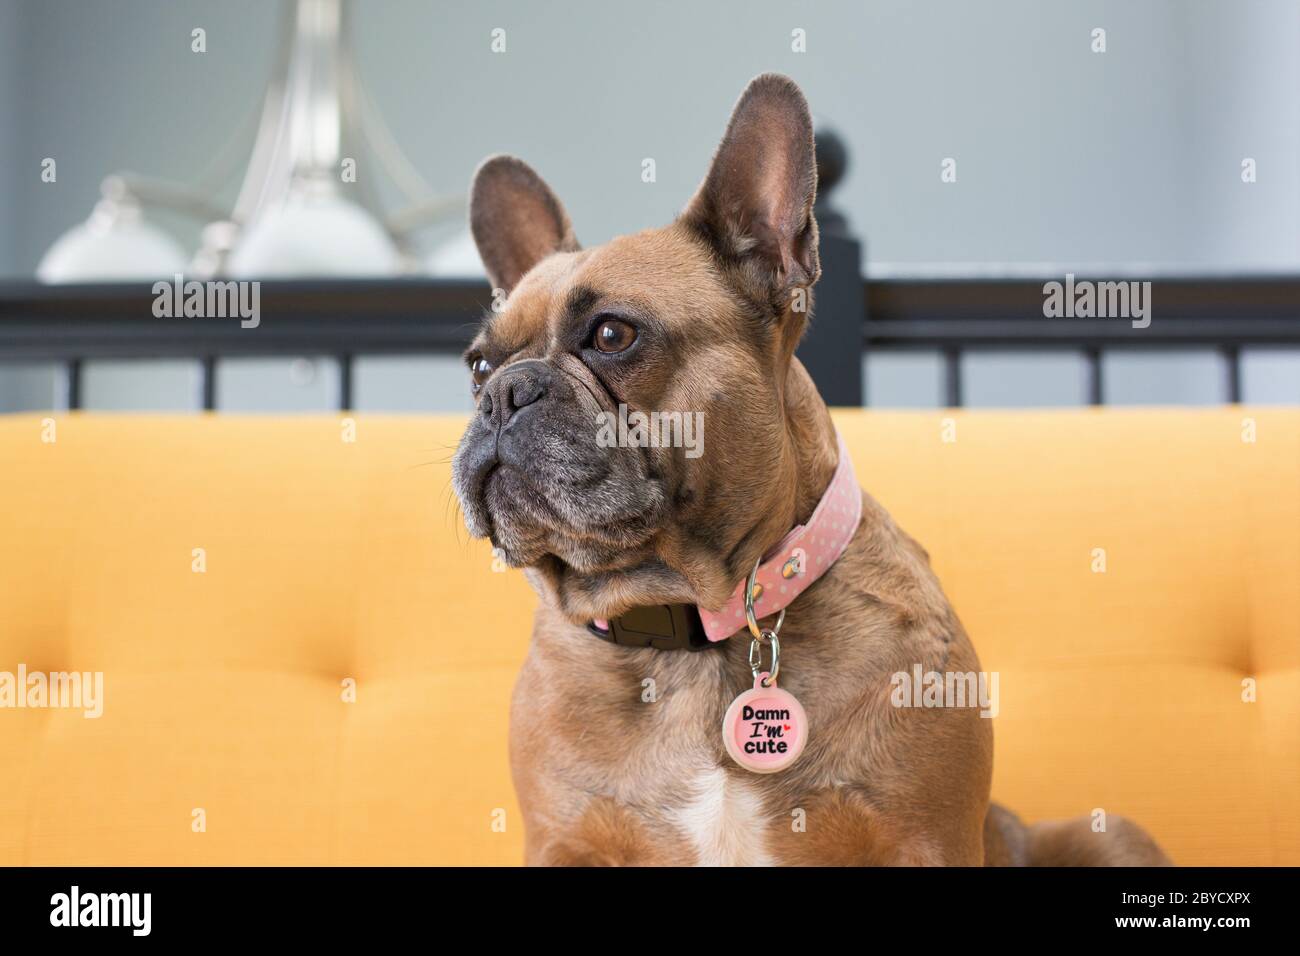 A french bulldog wearing a collar and tag that reads "Damn I'm Cute". Stock Photo